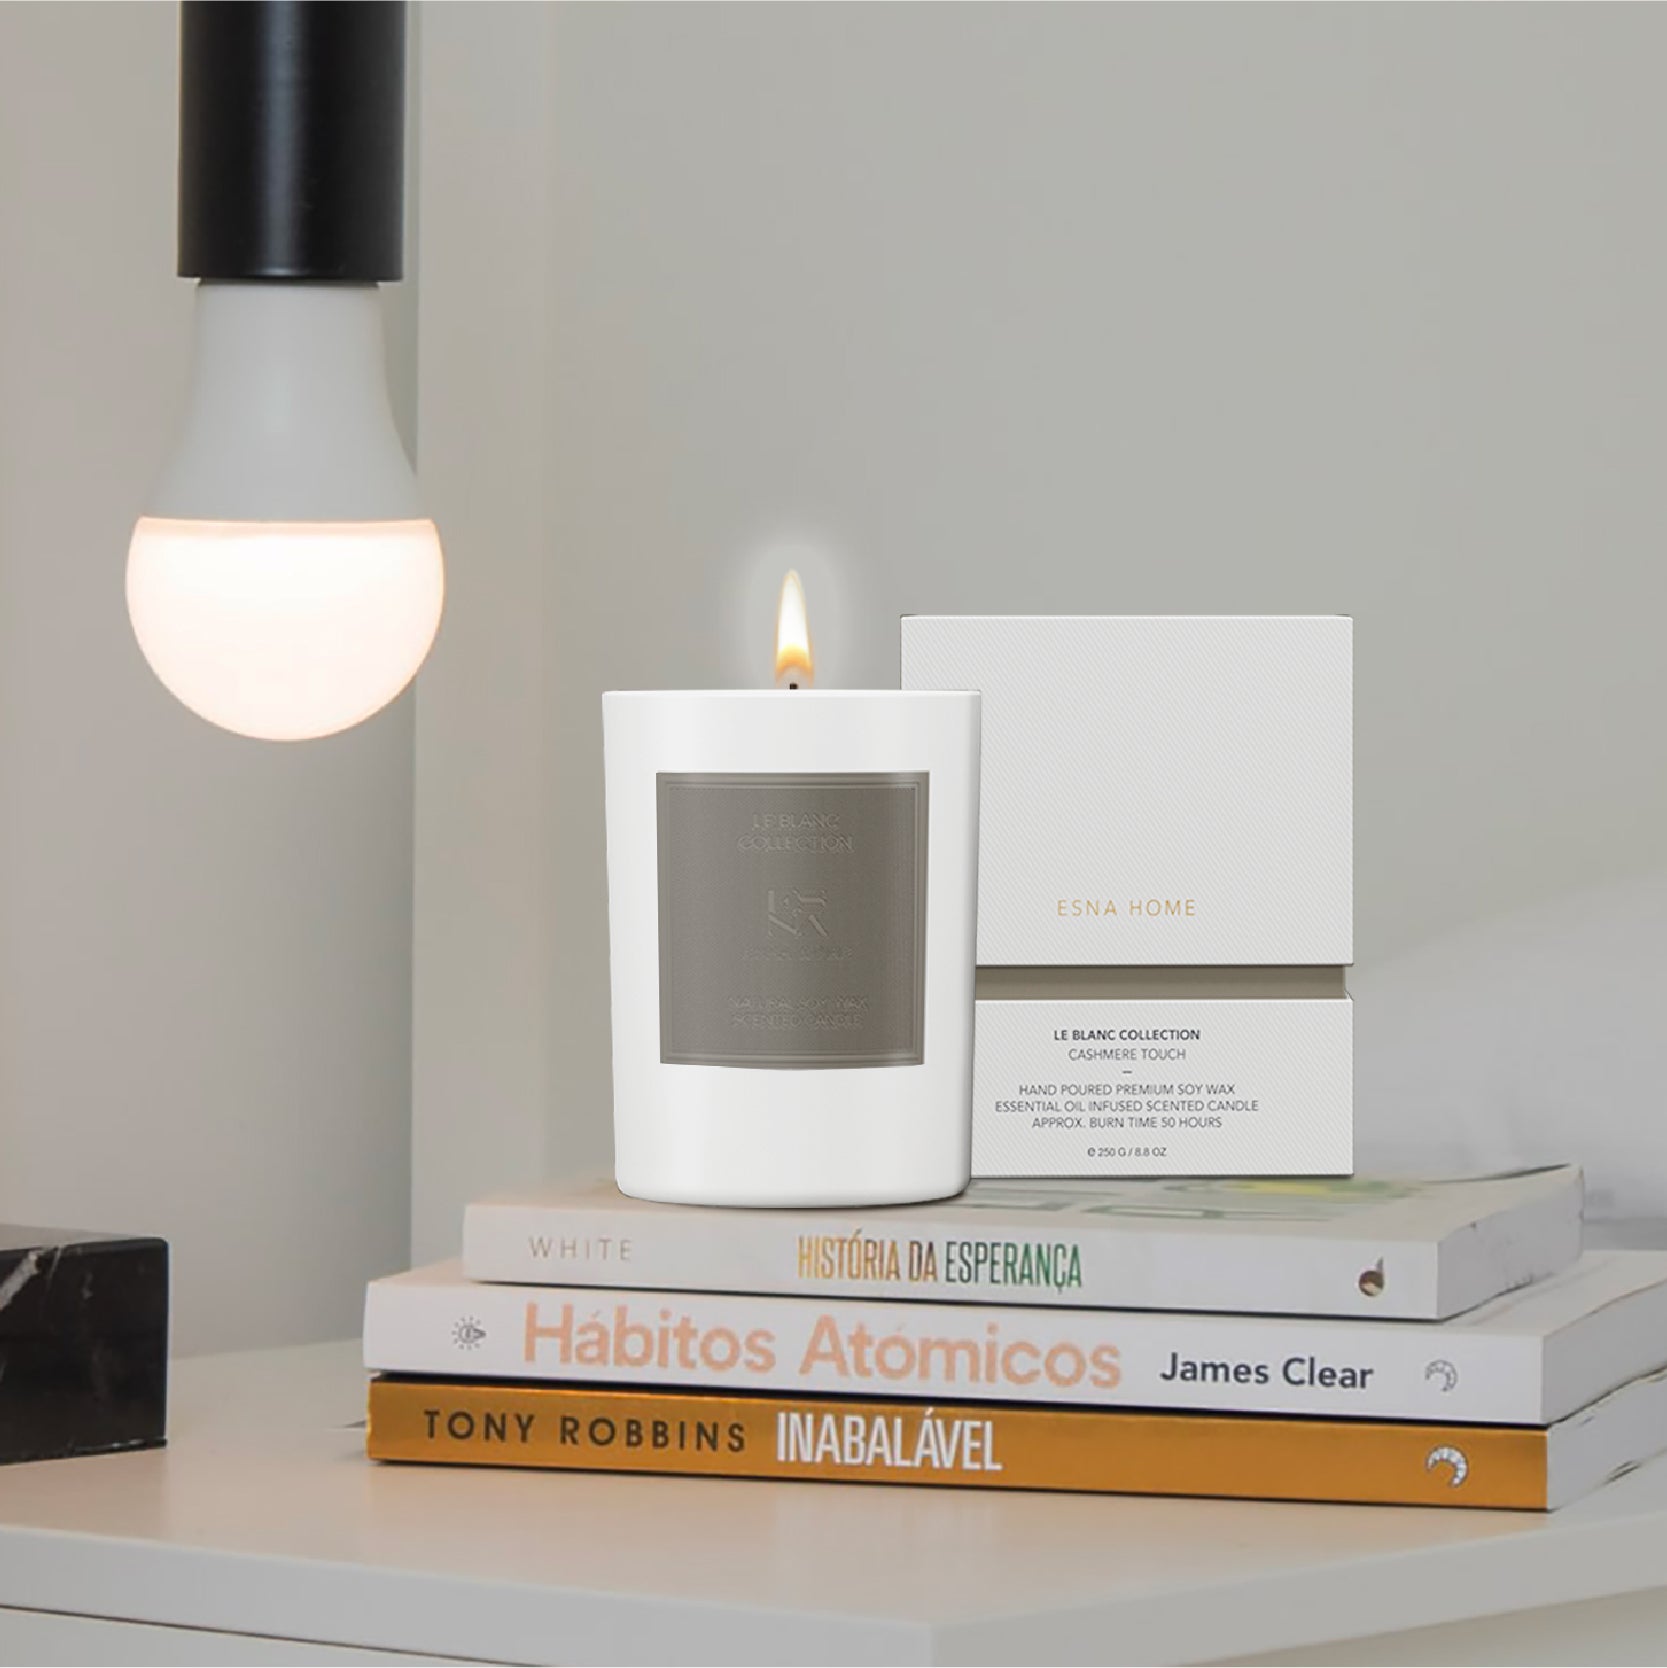 Cashmere Touch Scented Candle  |  Le Blanc Collection